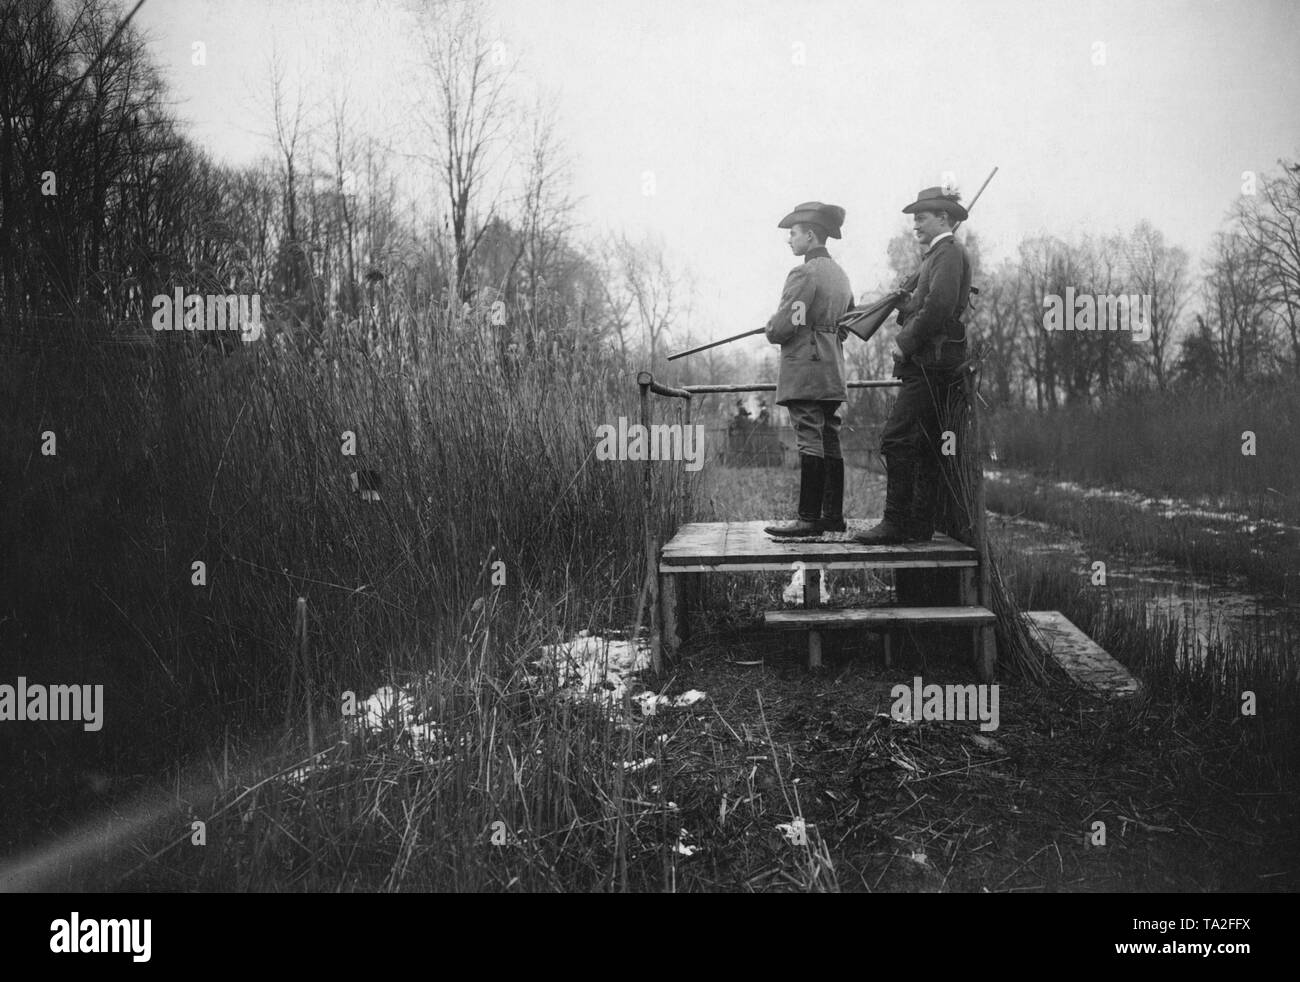 Duke Carl Eduard, Duke of Saxe-Coburg and Gotha on the hunt for birds, presumably ducks, on a reed belt. Behind him was his gun carrier. Stock Photo